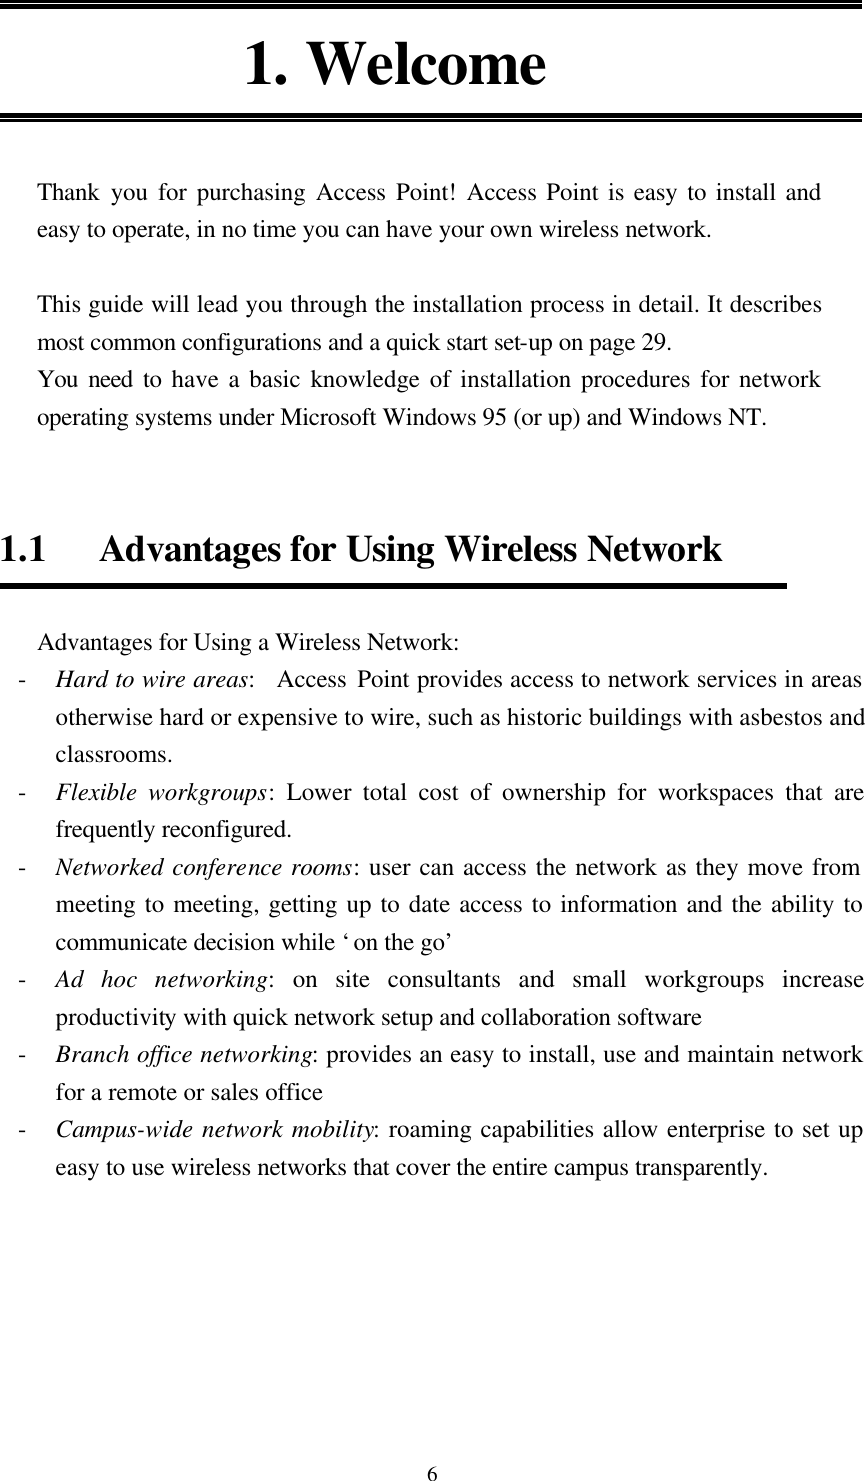  6 1. Welcome   Thank  you for purchasing Access Point! Access Point is easy to install and easy to operate, in no time you can have your own wireless network.    This guide will lead you through the installation process in detail. It describes most common configurations and a quick start set-up on page 29. You need to have a basic knowledge of installation procedures for network operating systems under Microsoft Windows 95 (or up) and Windows NT.   1.1   Advantages for Using Wireless Network    Advantages for Using a Wireless Network: - Hard to wire areas:  Access Point provides access to network services in areas otherwise hard or expensive to wire, such as historic buildings with asbestos and classrooms. - Flexible workgroups: Lower total cost of ownership for workspaces that are frequently reconfigured. - Networked conference rooms: user can access the network as they move from meeting to meeting, getting up to date access to information and the ability to communicate decision while ‘on the go’ - Ad hoc networking: on site consultants and small workgroups increase productivity with quick network setup and collaboration software   - Branch office networking: provides an easy to install, use and maintain network for a remote or sales office - Campus-wide network mobility: roaming capabilities allow enterprise to set up easy to use wireless networks that cover the entire campus transparently.     